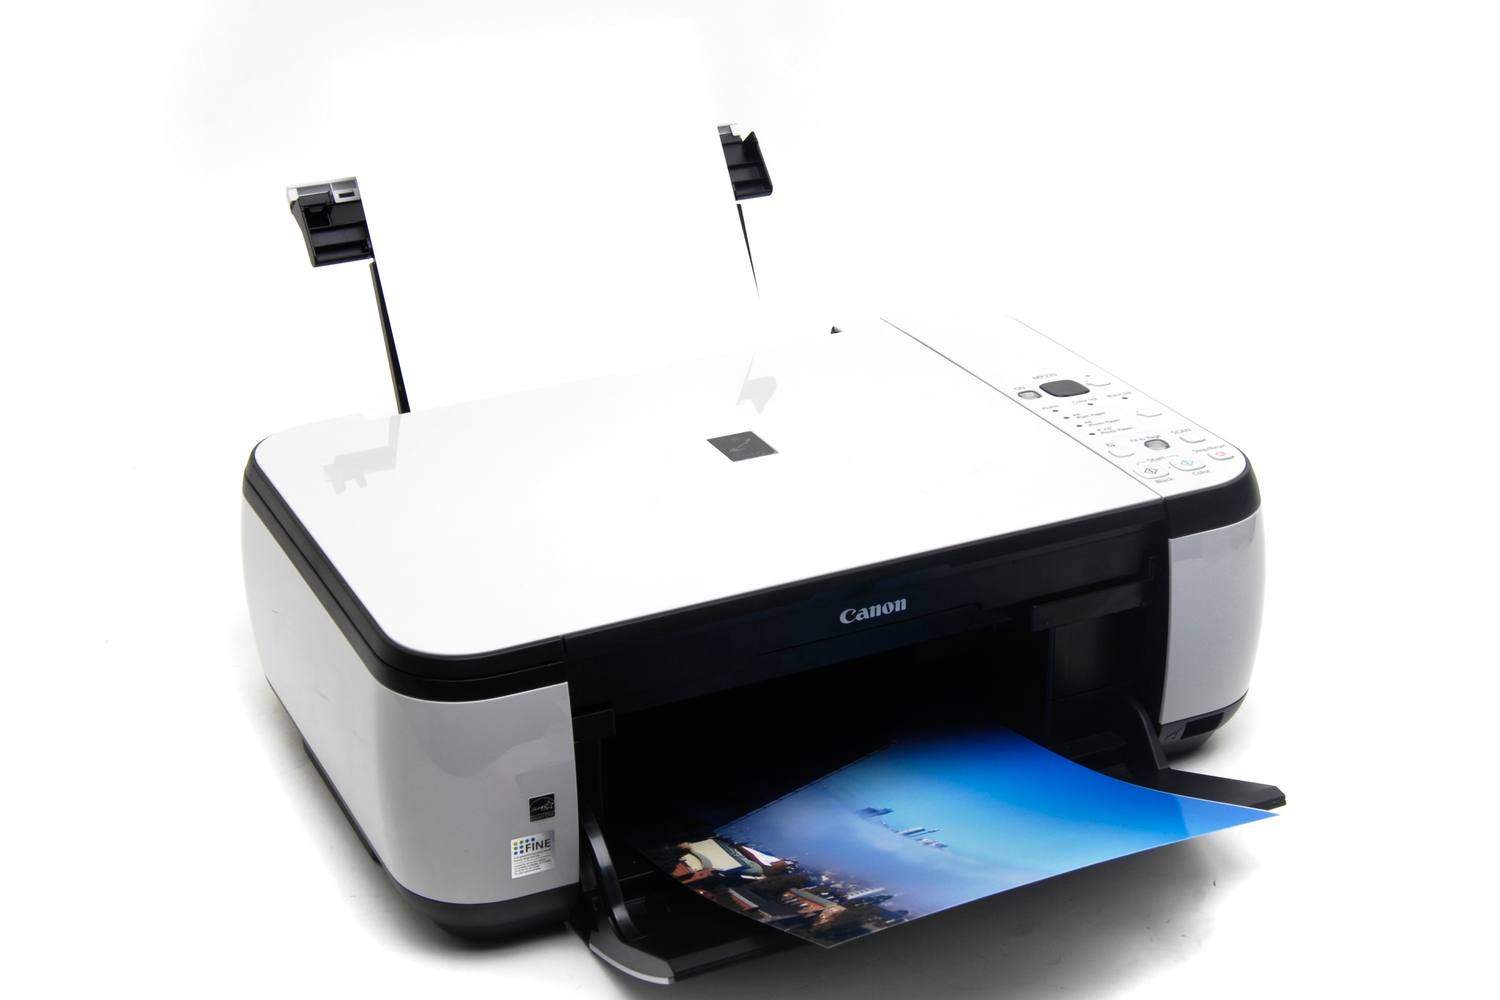 Canon MP270 Scanner Driver Mac 10.13 High Sierra How to Download & Install - Featured